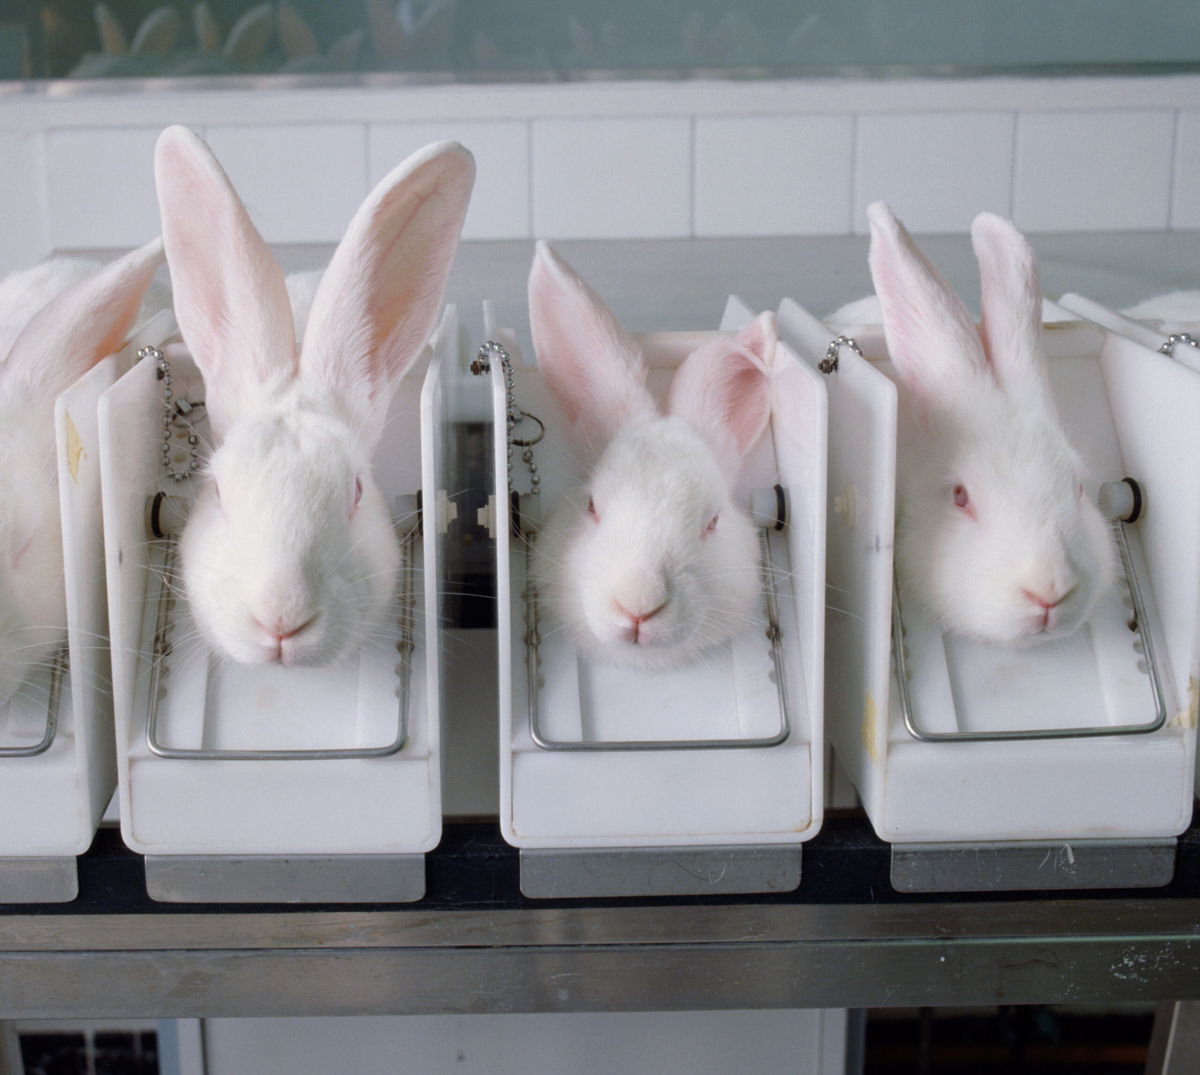 <i>Siqui Sanchez/The Image Bank RF/Getty Images</i><br/>New York has become the tenth state to ban cosmetics testing on animals.